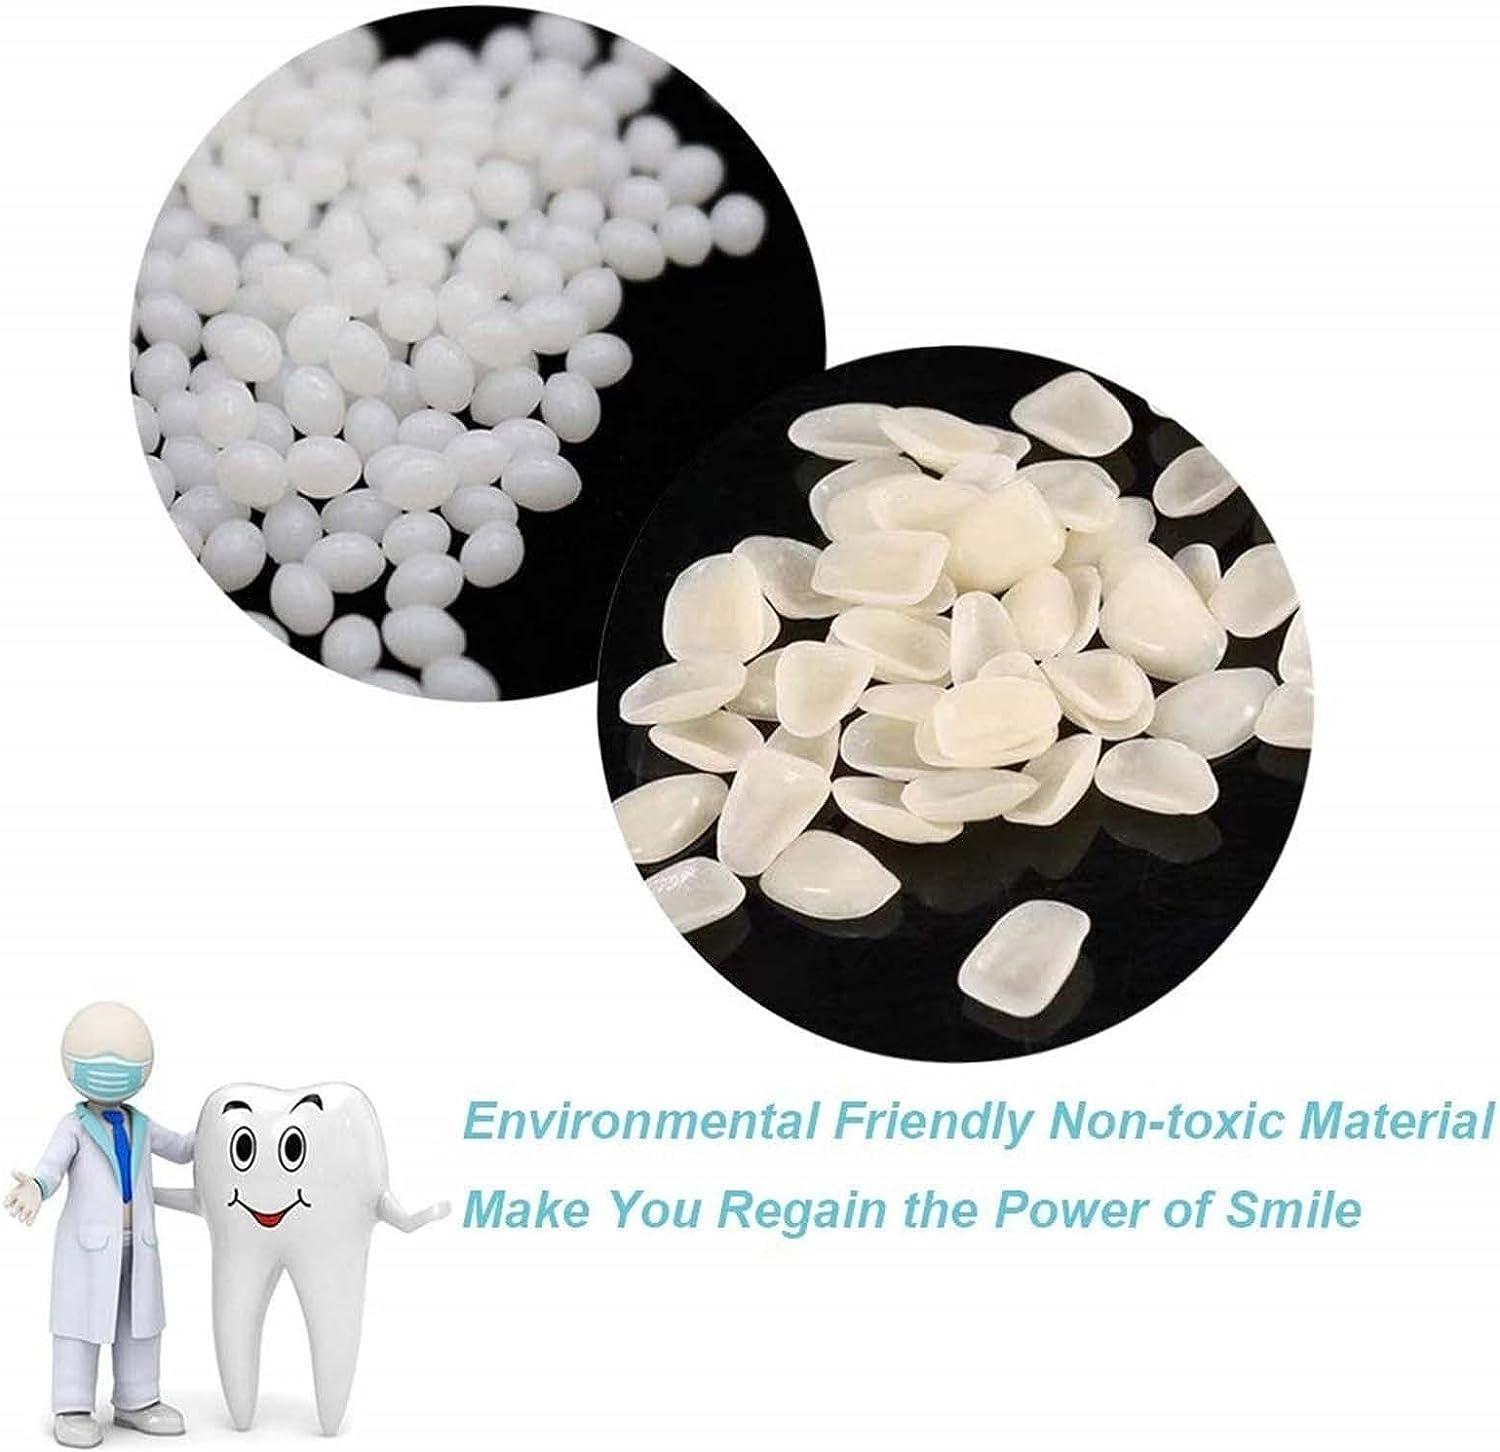 Fake Tooth Repair kits for Filling The Missing Broken Tooth and  Gaps-Moldable Fake Teeth and Thermal Beads Replacement Kits